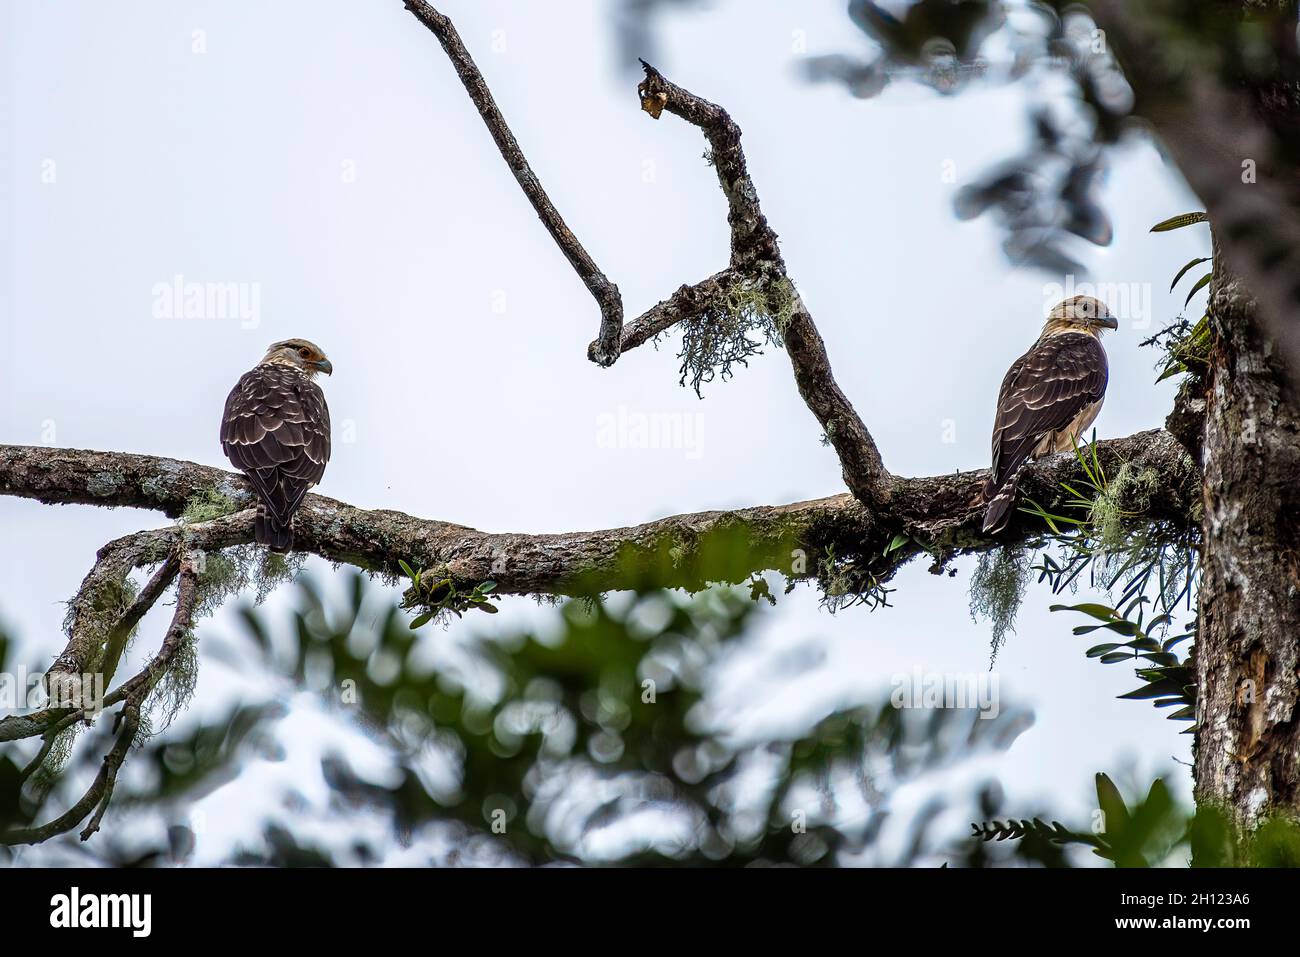 Pair of  yellow headed caracara birds perched on a branch Stock Photo